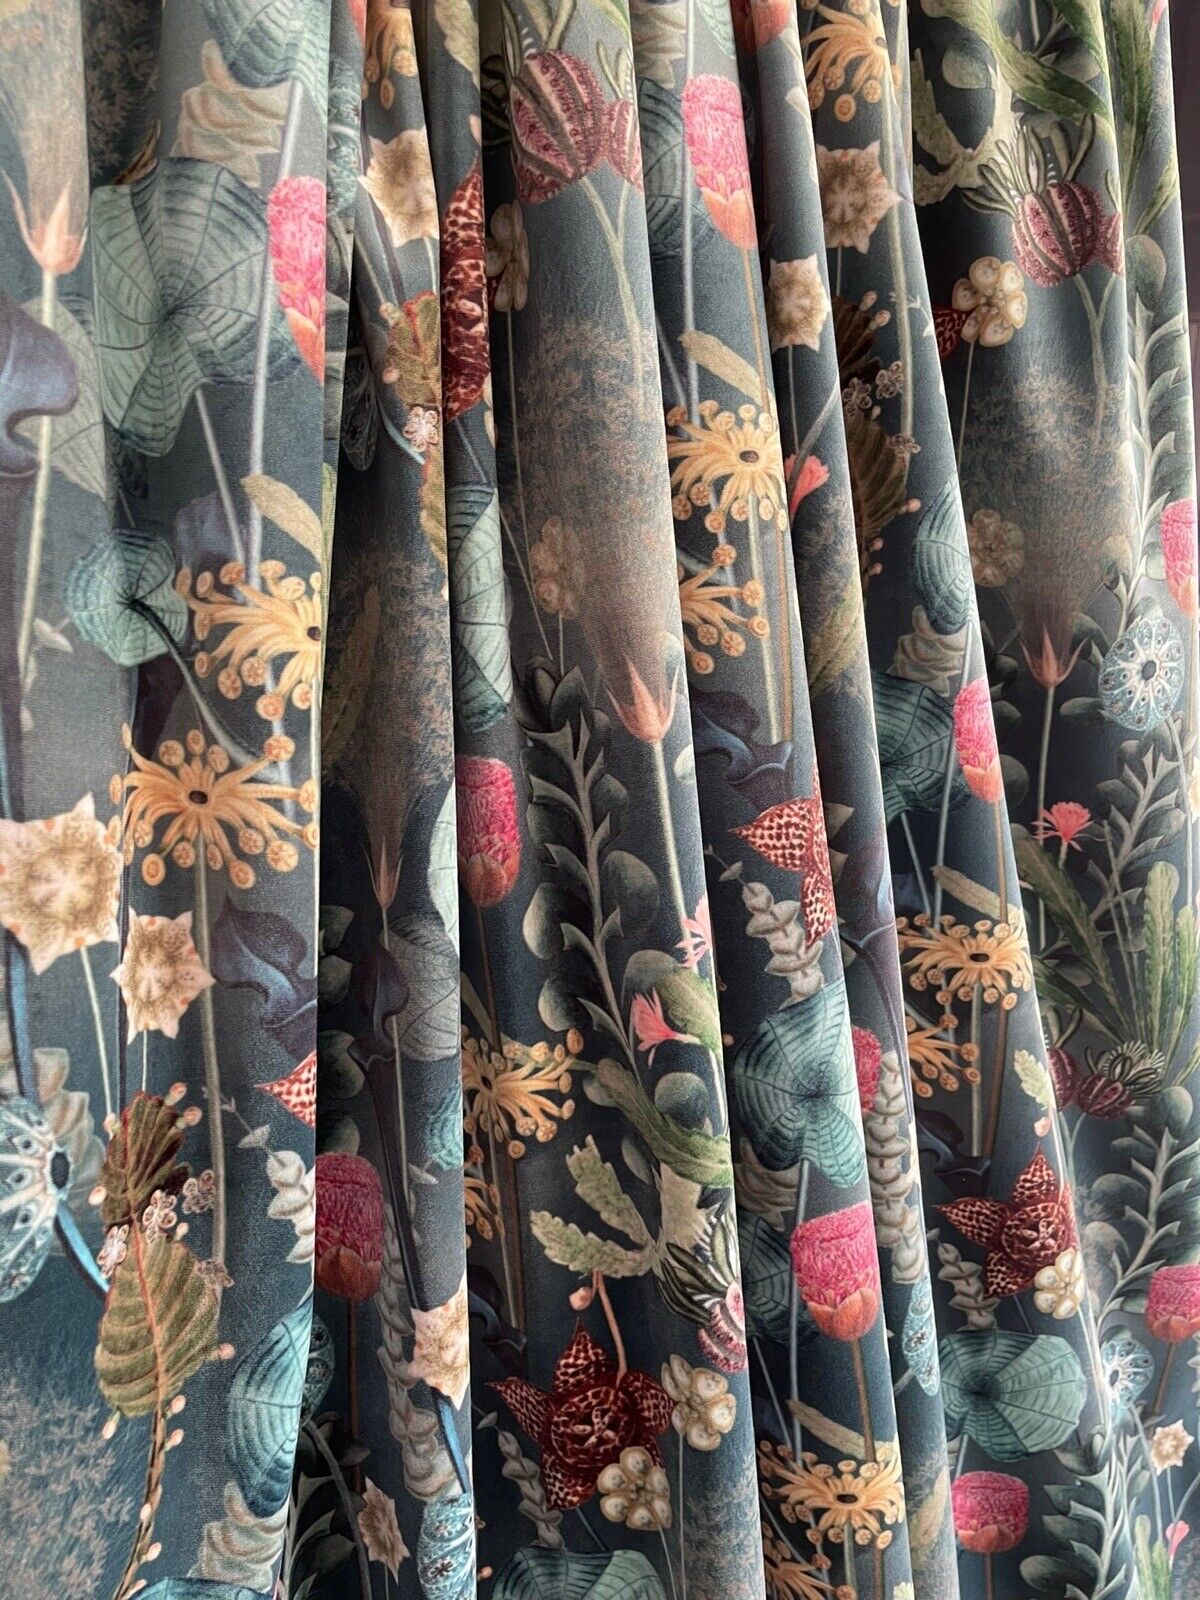 Herbarium Printed Velvet by Meter Botanical Sewing Material Floral Textile Plants Water Lilly Teal Green Yellow Colors